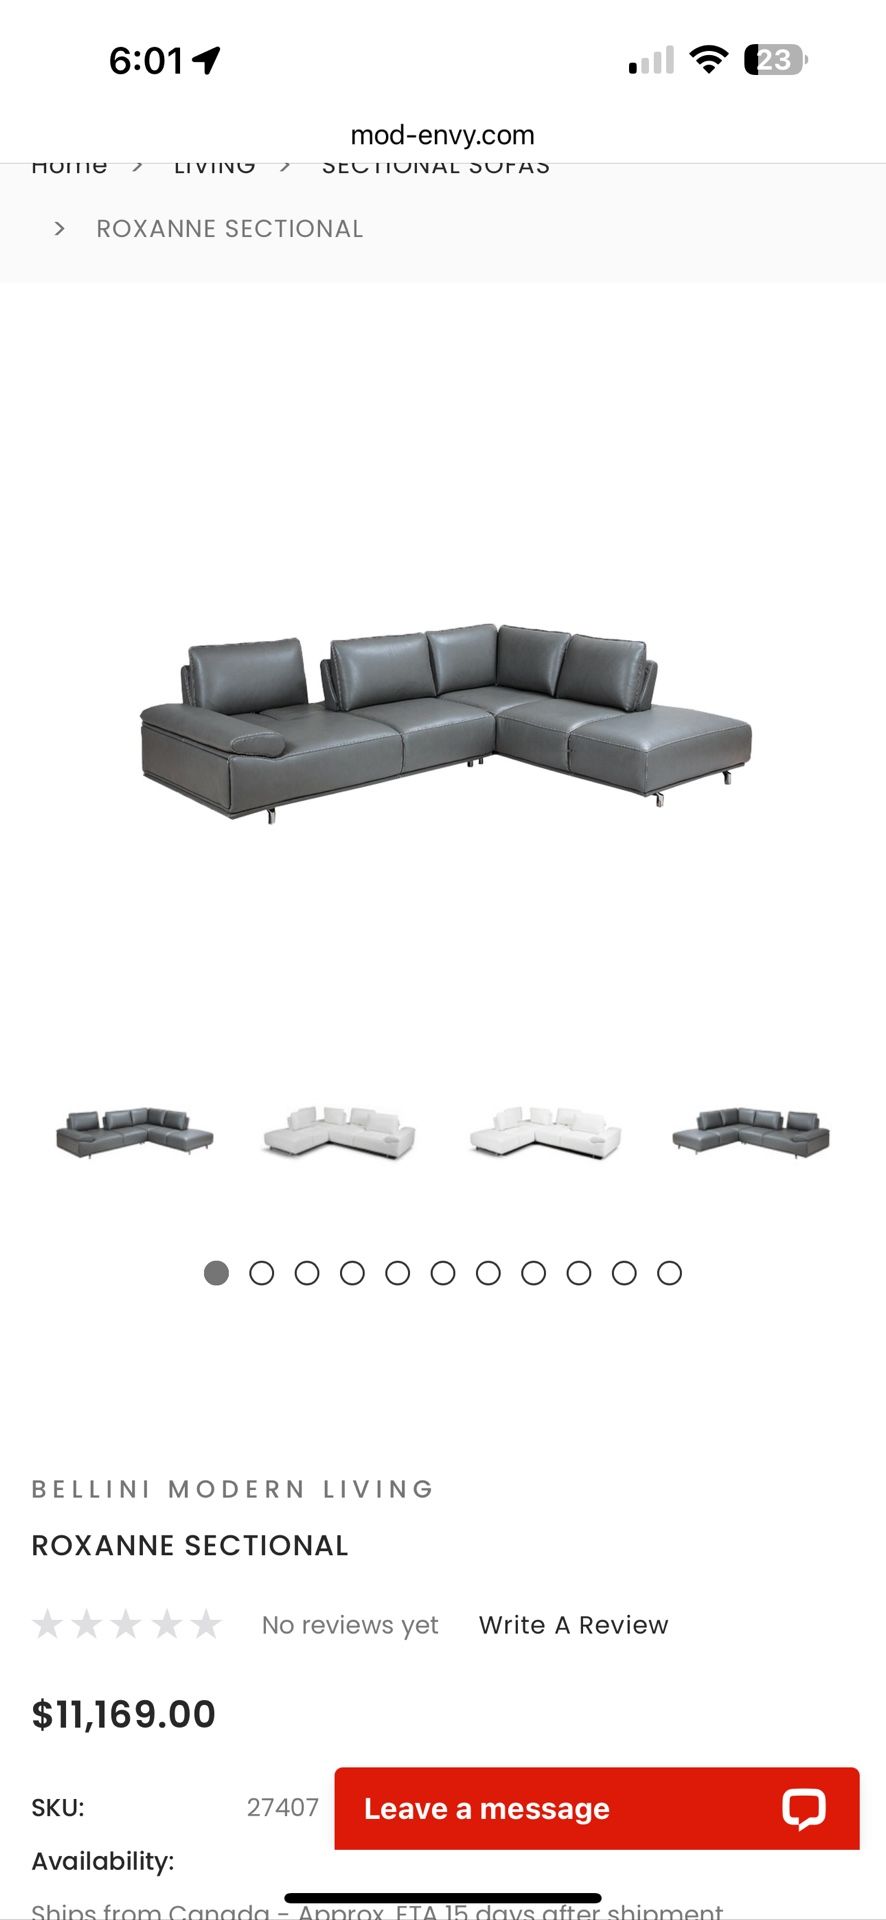 Gray Sectional. 